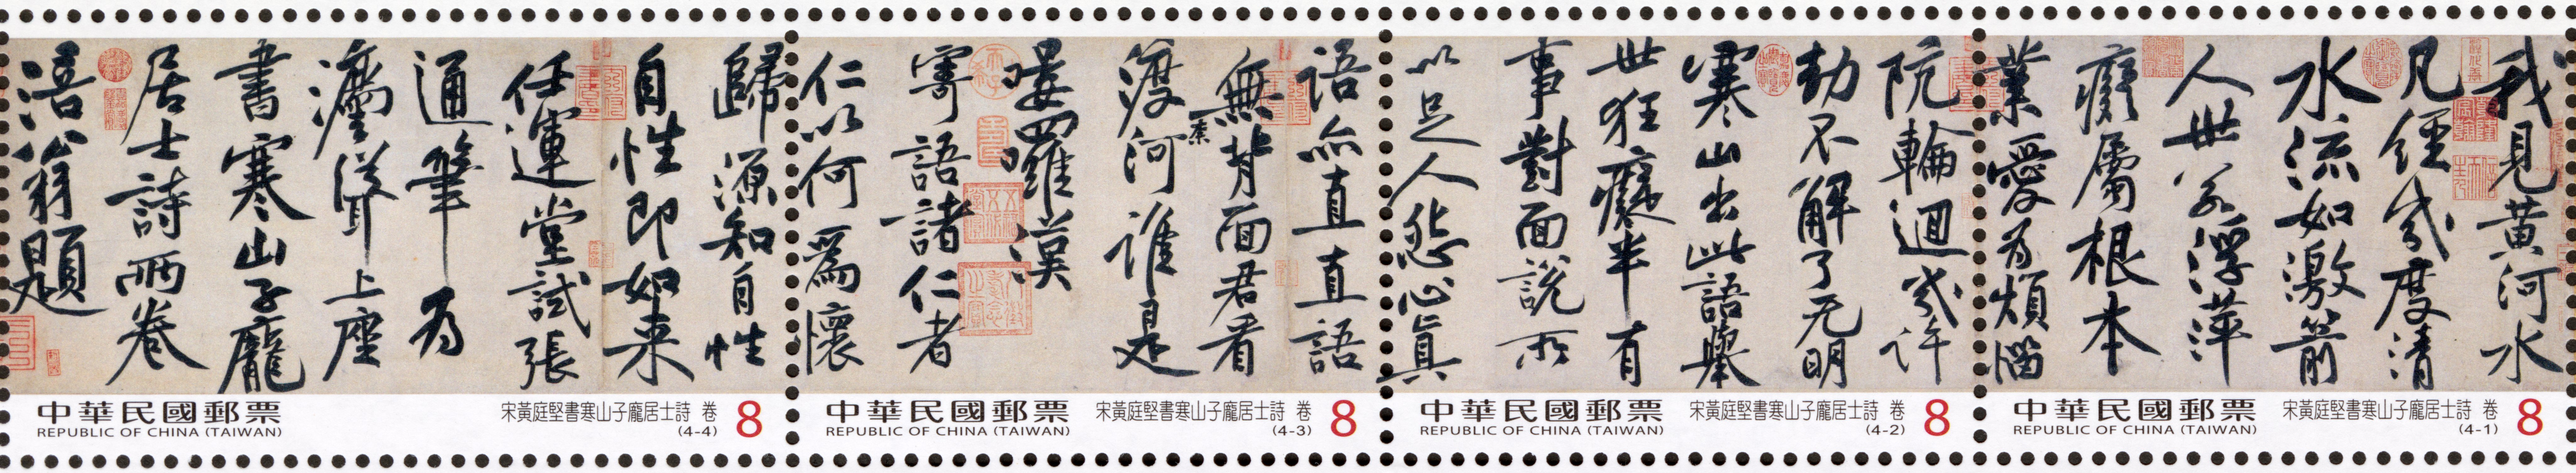 Calligraphy Postage Stamps－Poetry of Hanshan and Recluse Pang